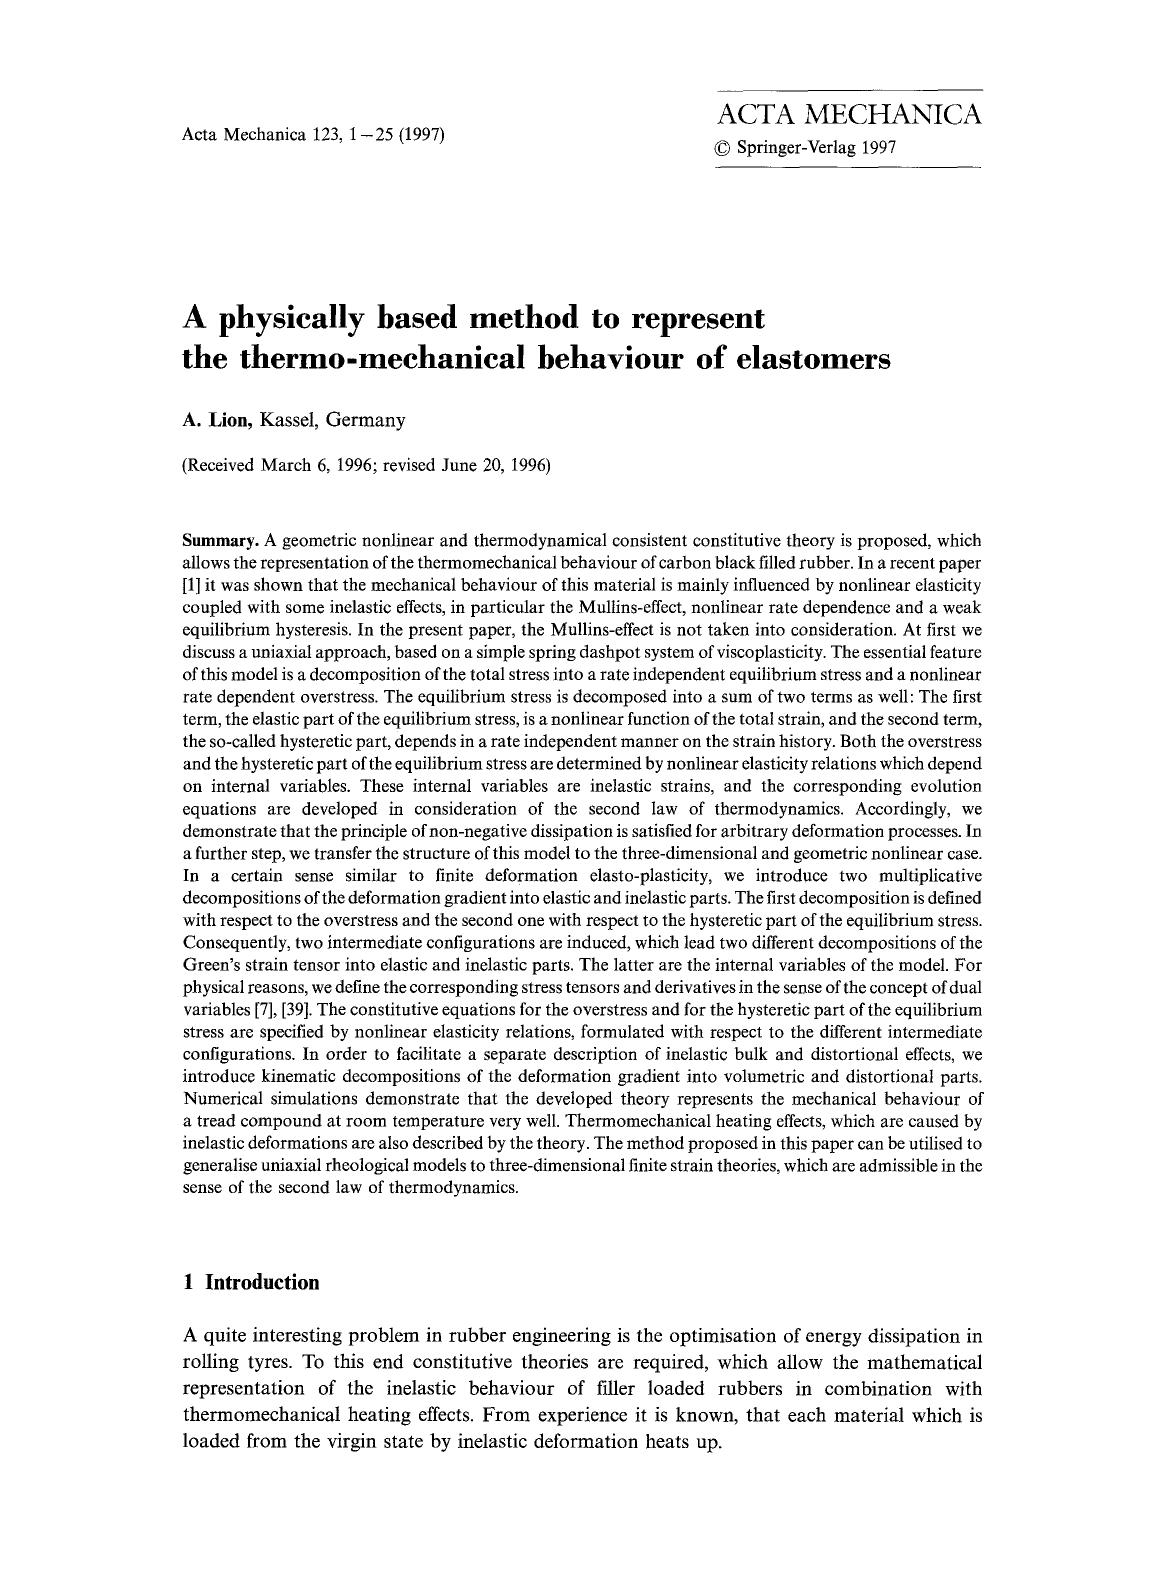 A physically based method to represent the thermo-mechanical behaviour of elastomers by Unknown